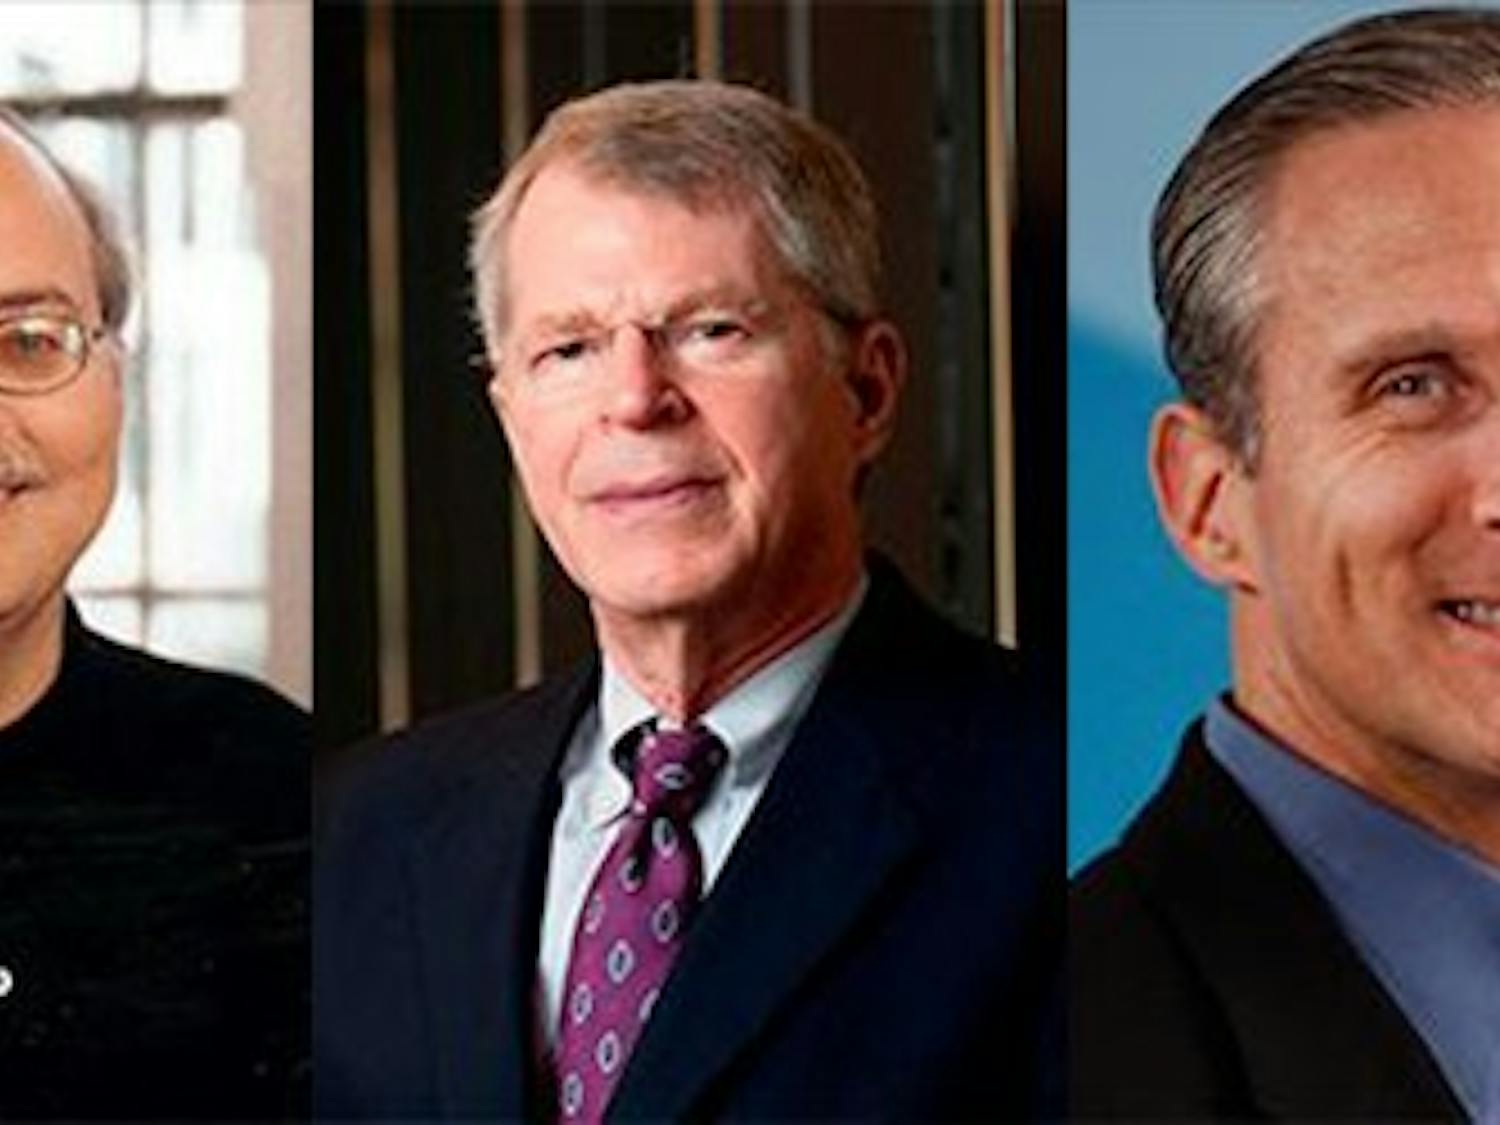 (Left to right) Chuck Robel, Leonard Berry and Brian Gentile will be inducted into W.P. Carey School of Business's Hall of Fame. (Photos Courtesy of W. P. Carey School of Business)